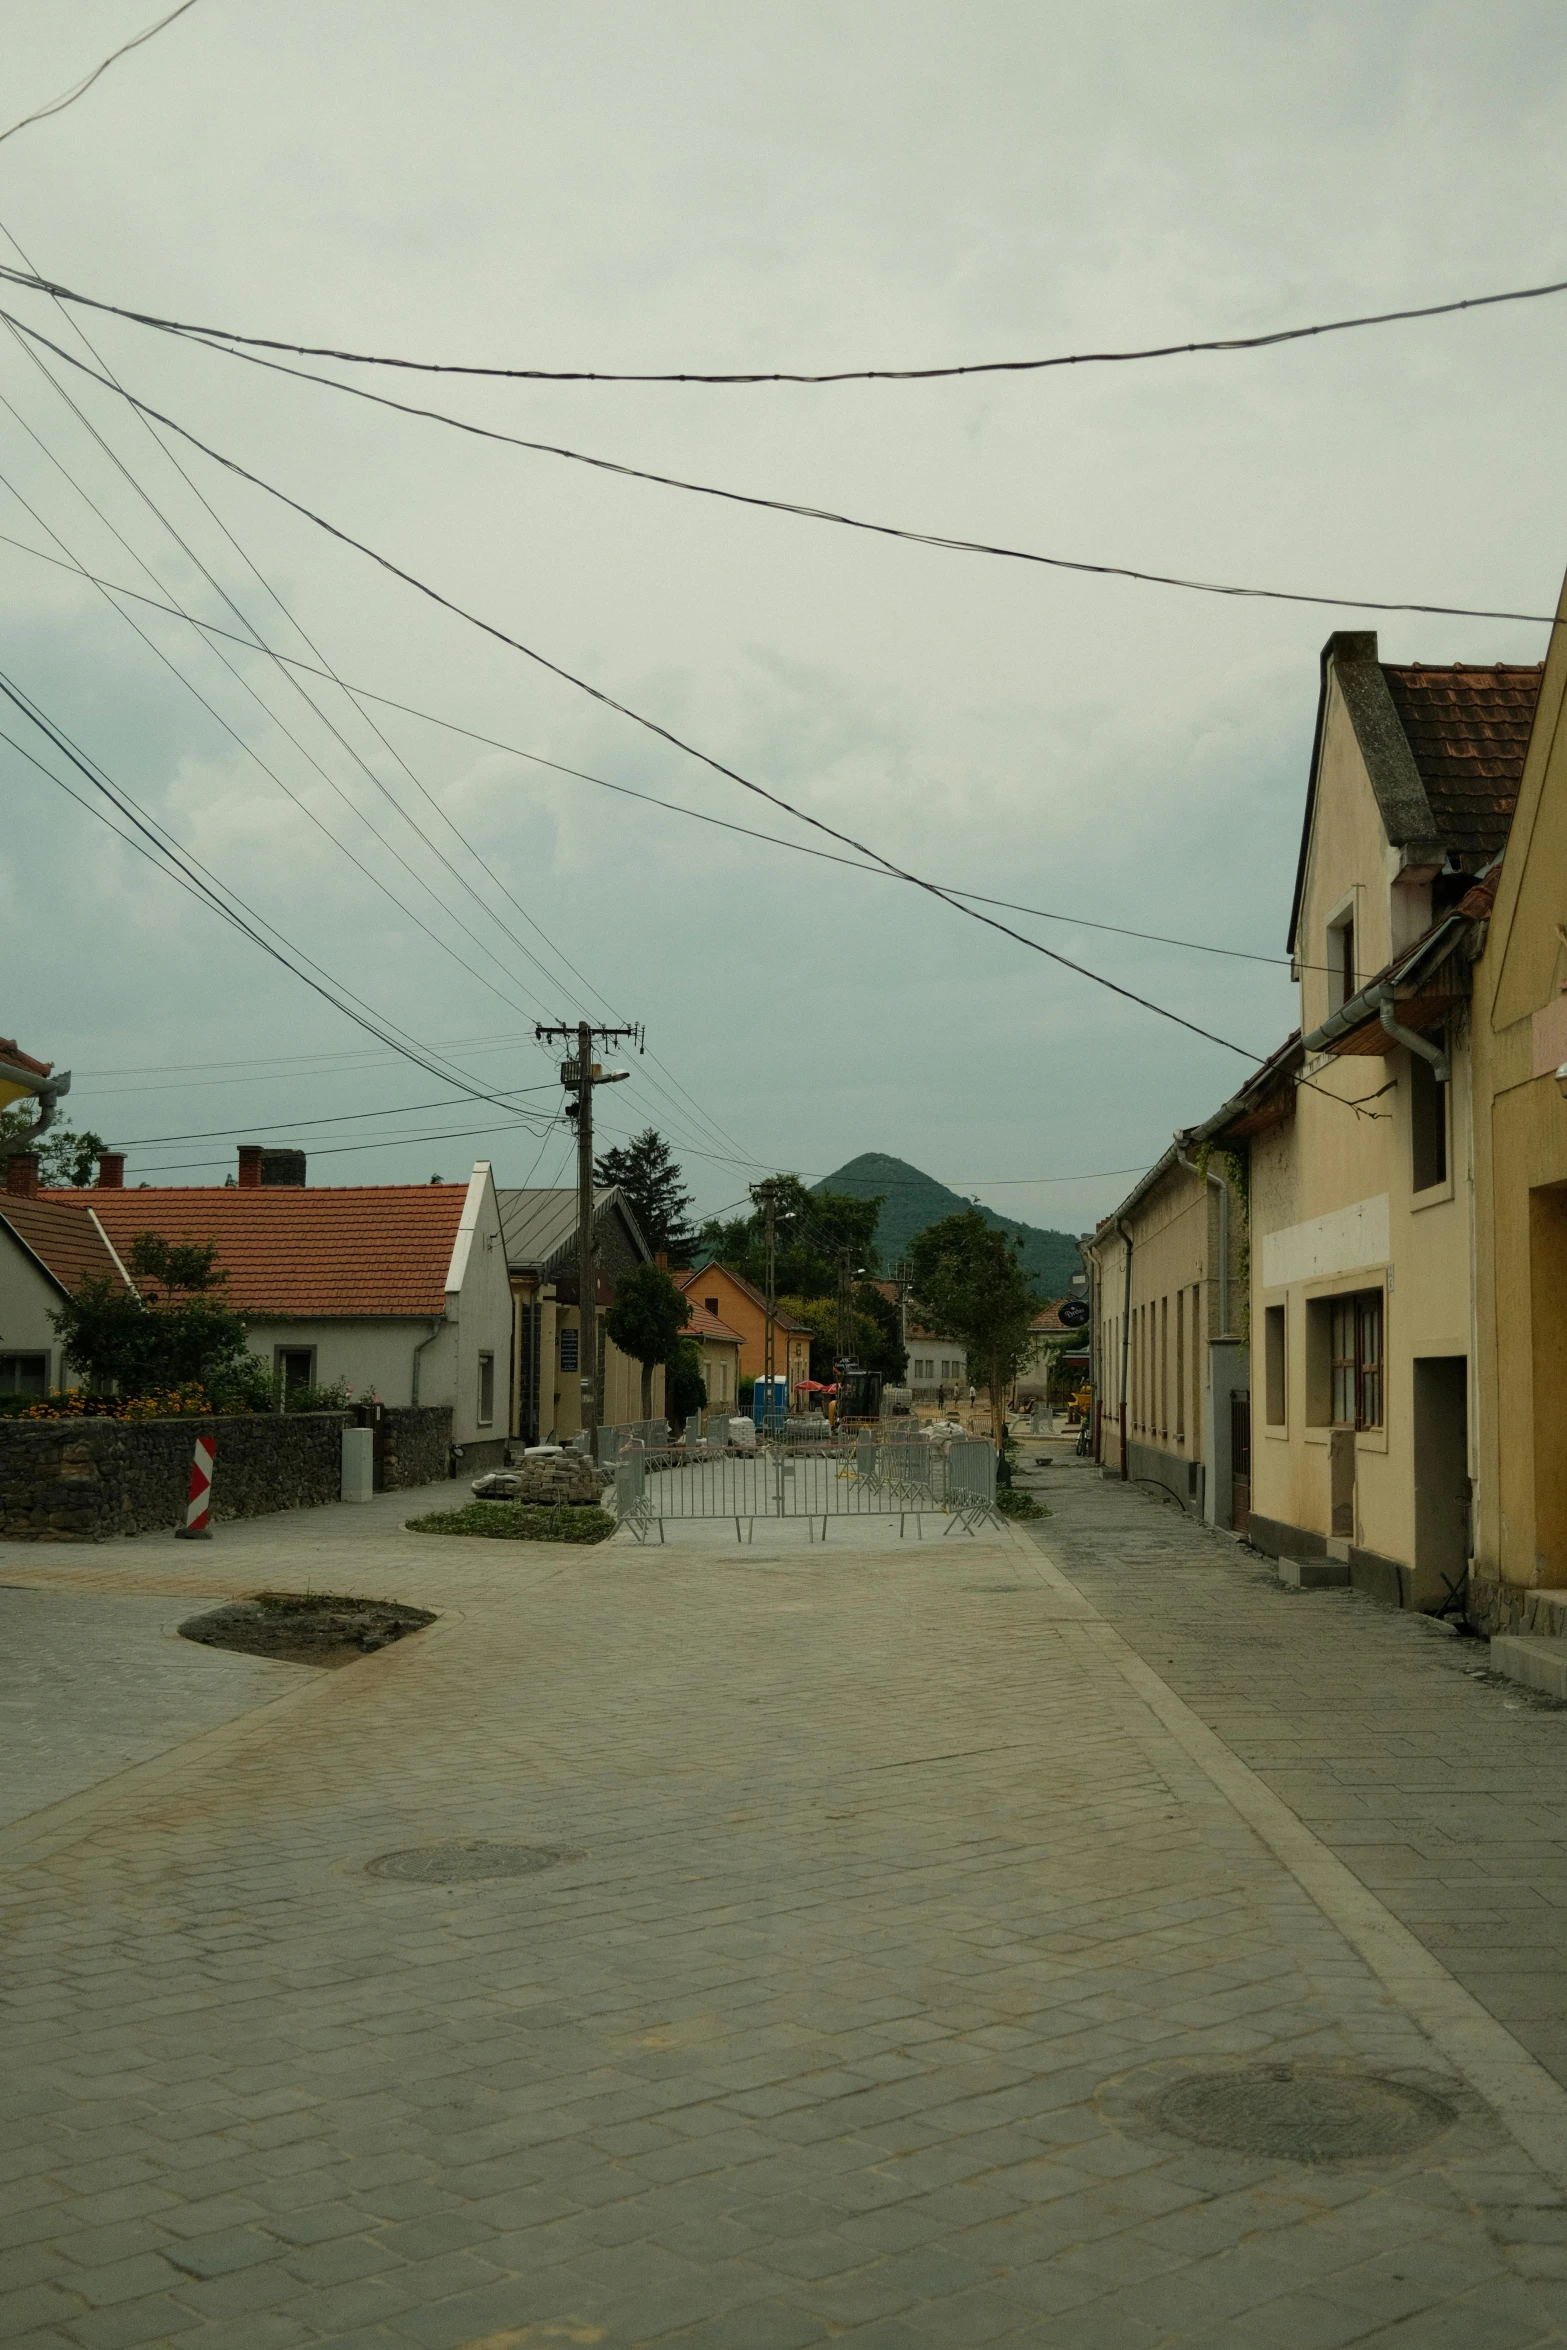 this is an old town setting with buildings, telephone poles and wires